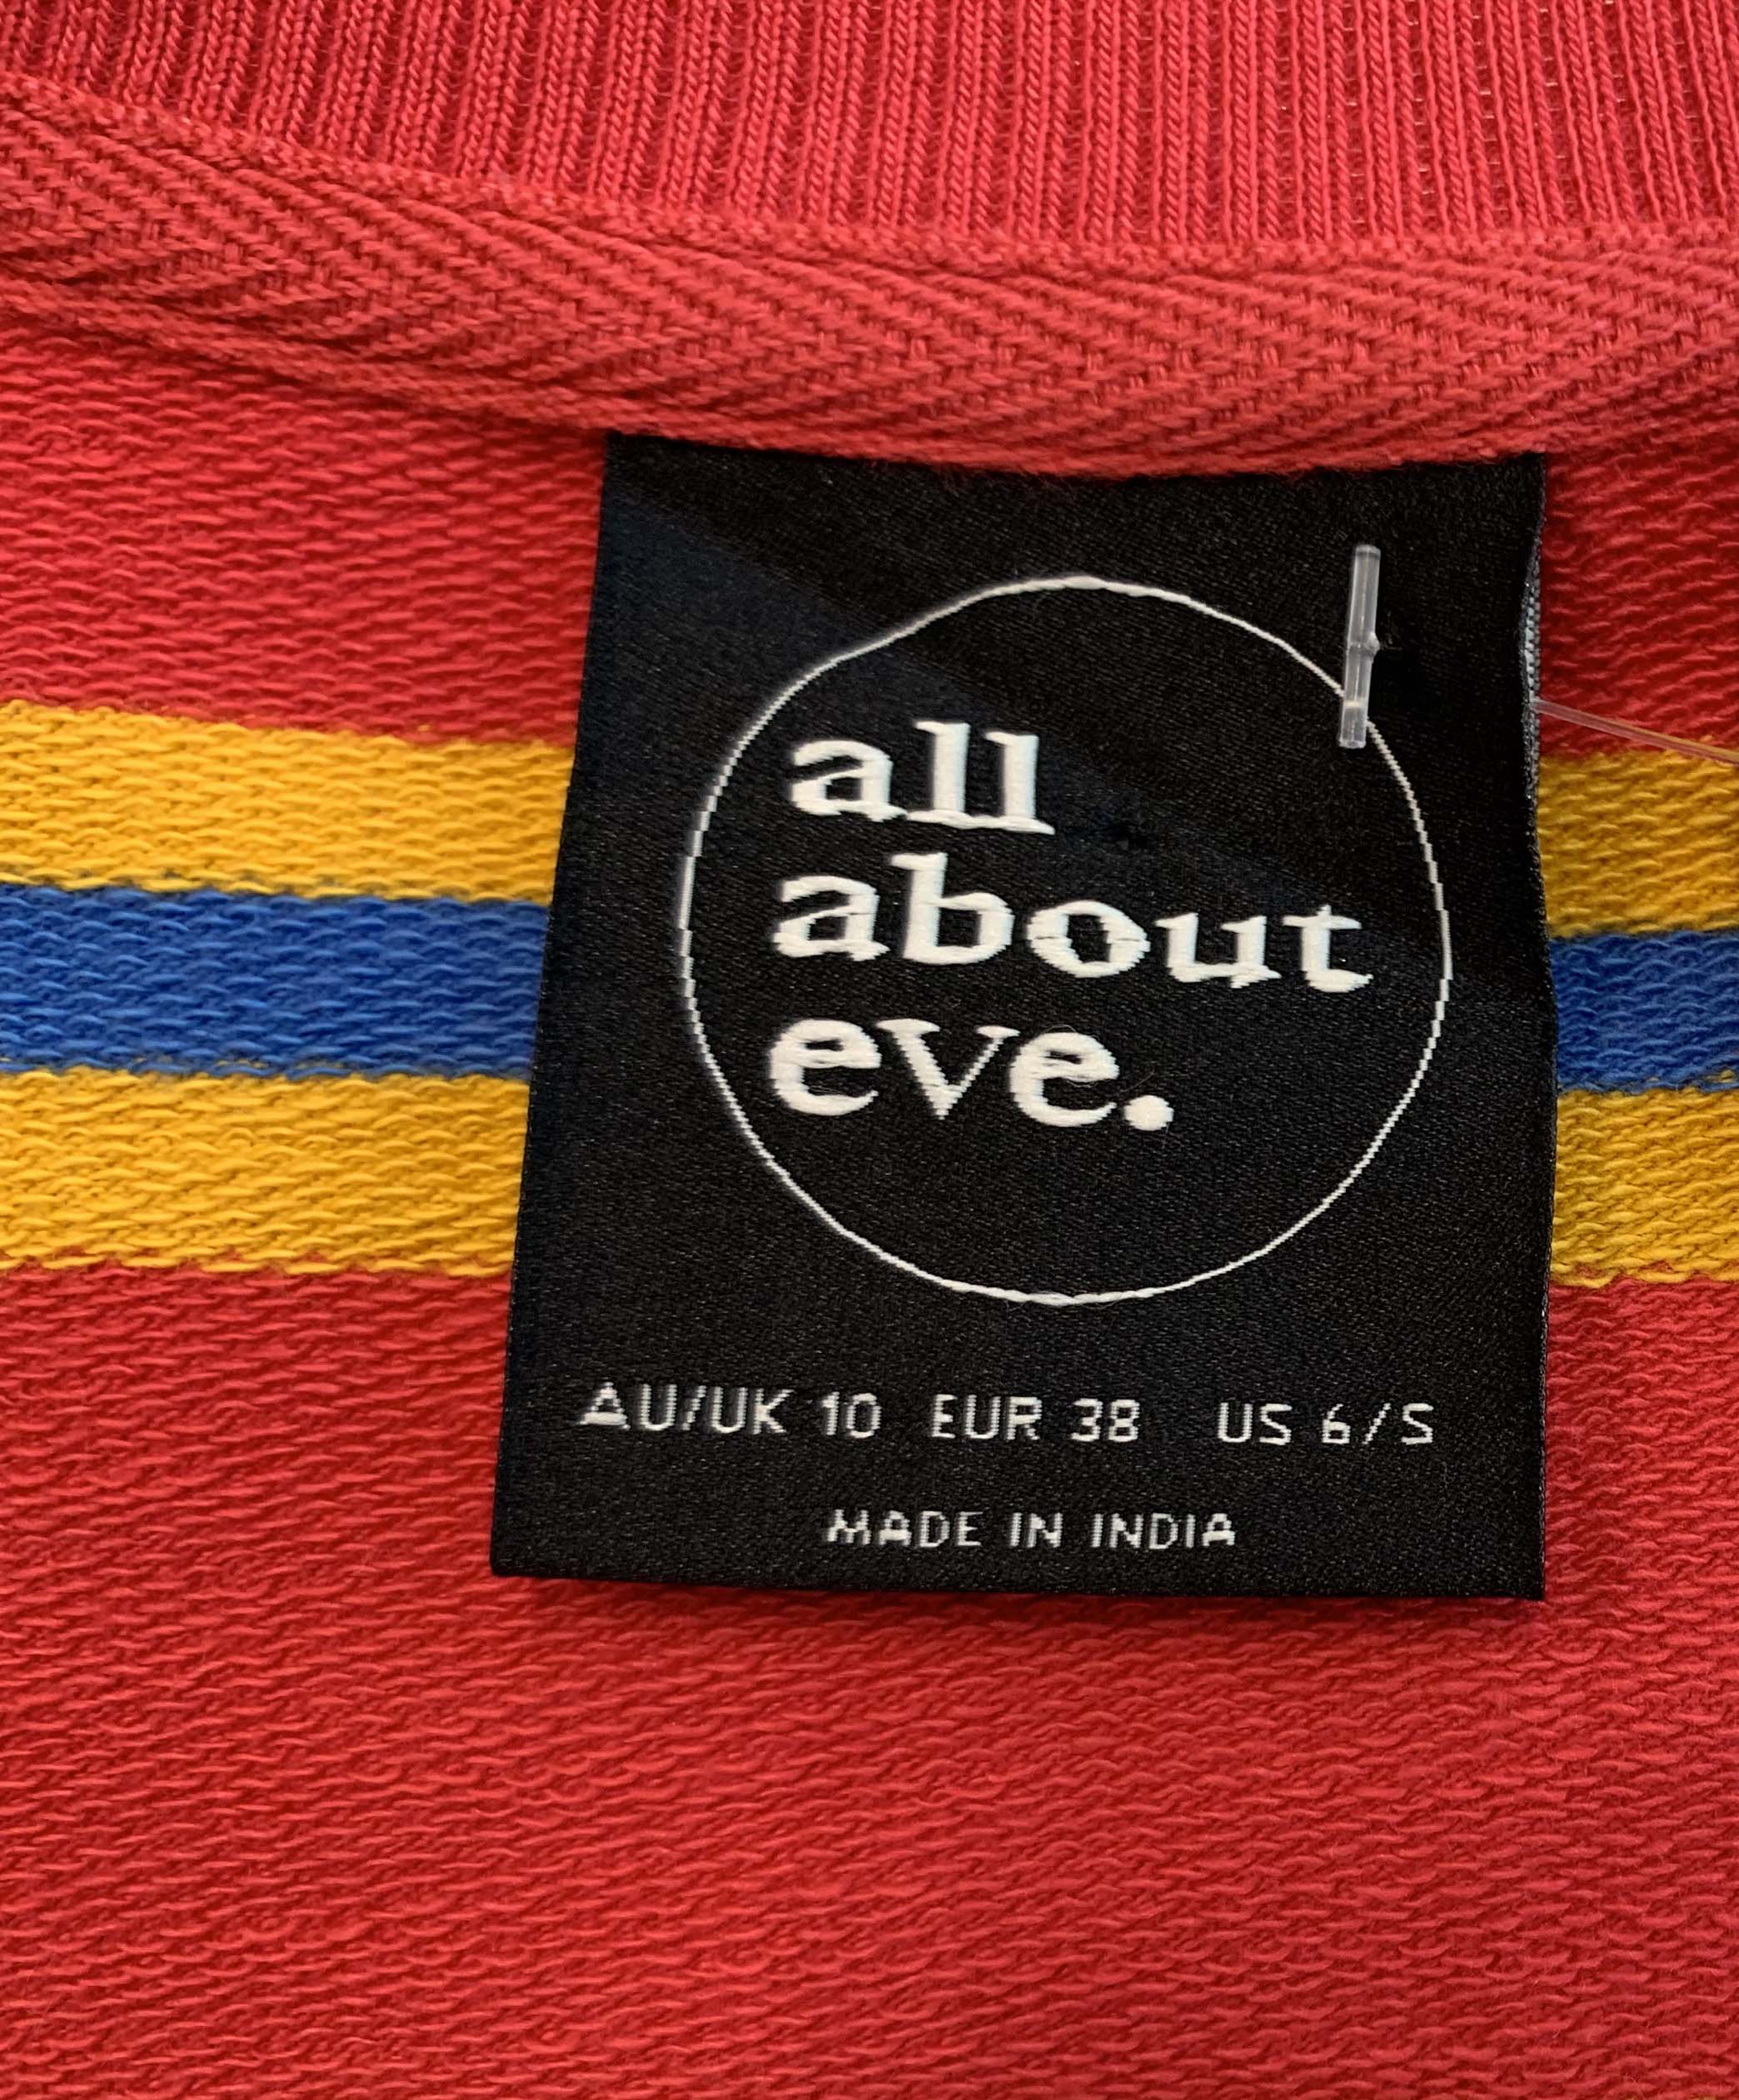 ALL ABOVE EVE striped jumper 